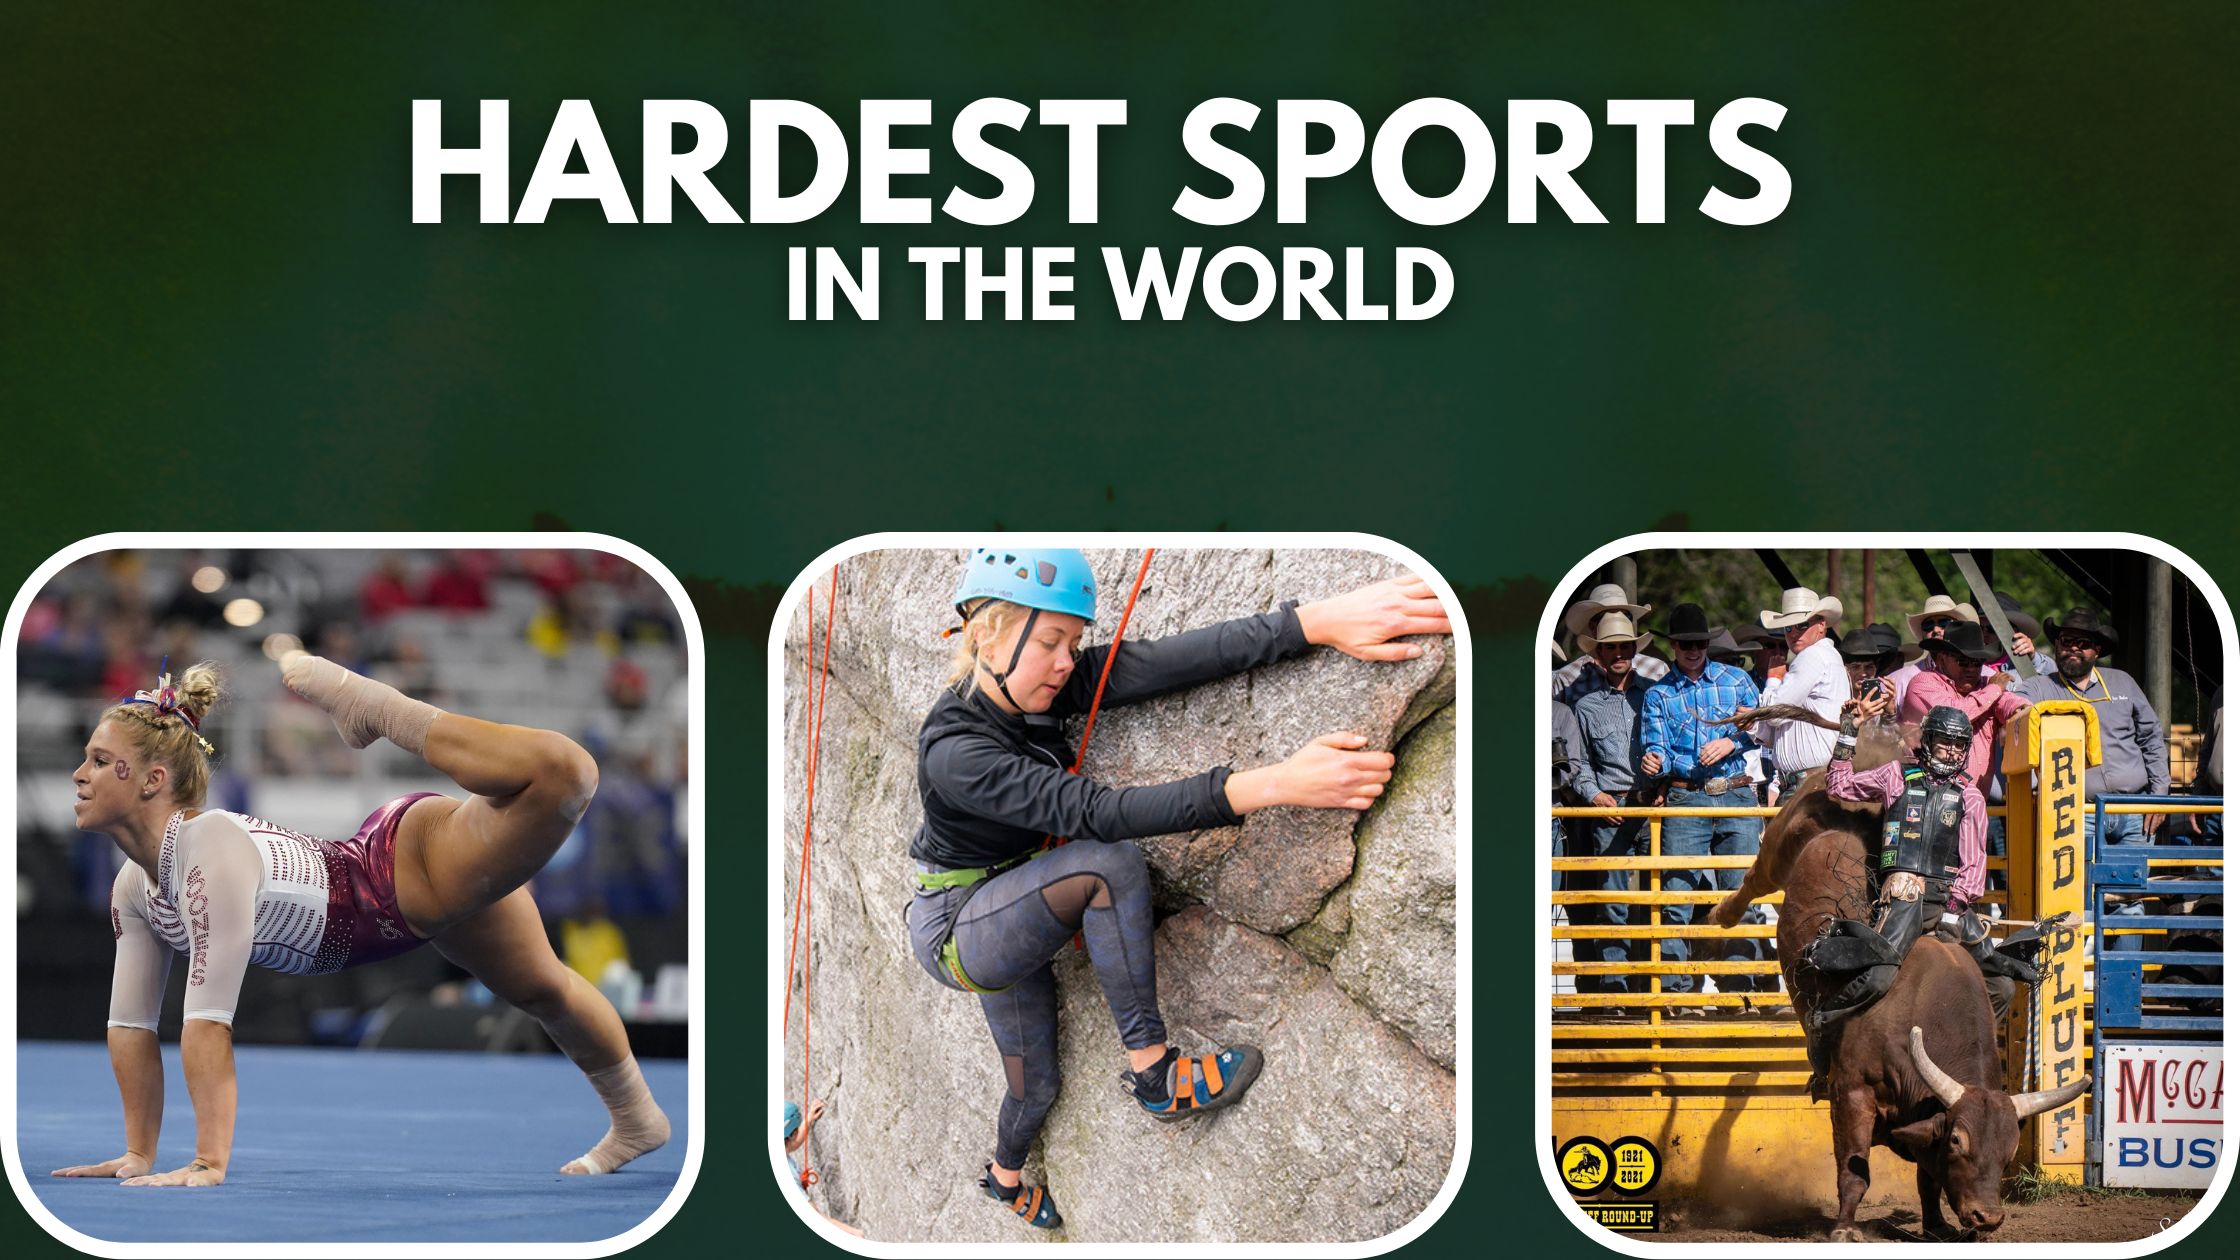 Hardest Sports in the world